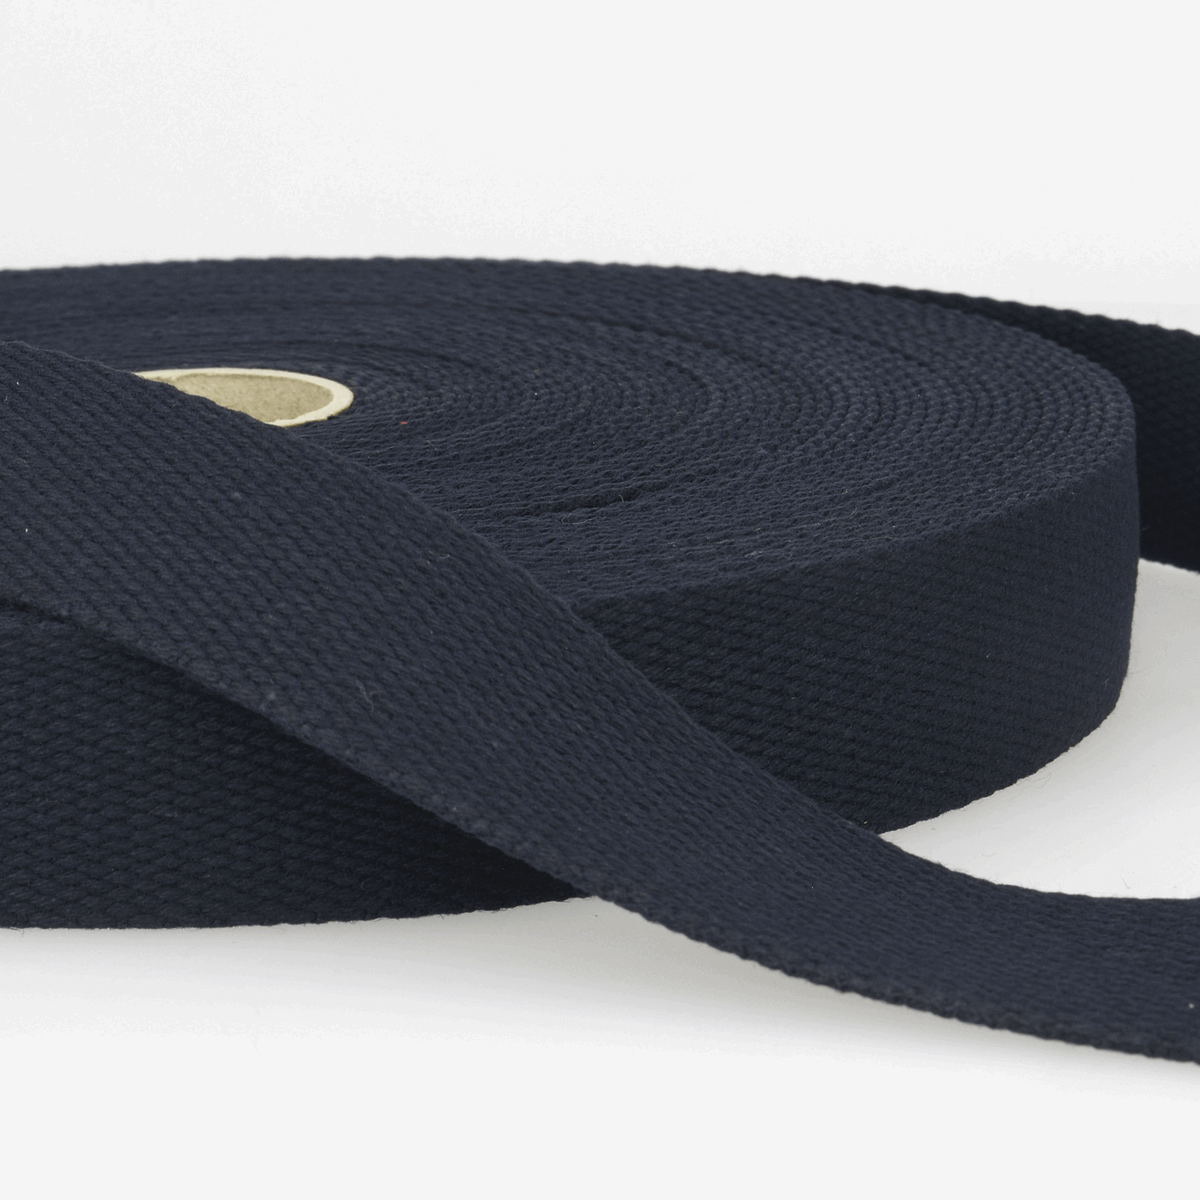 Solid Plain Cotton Webbing: 25 mm wide bag strapping. 20 colours. Per metre.